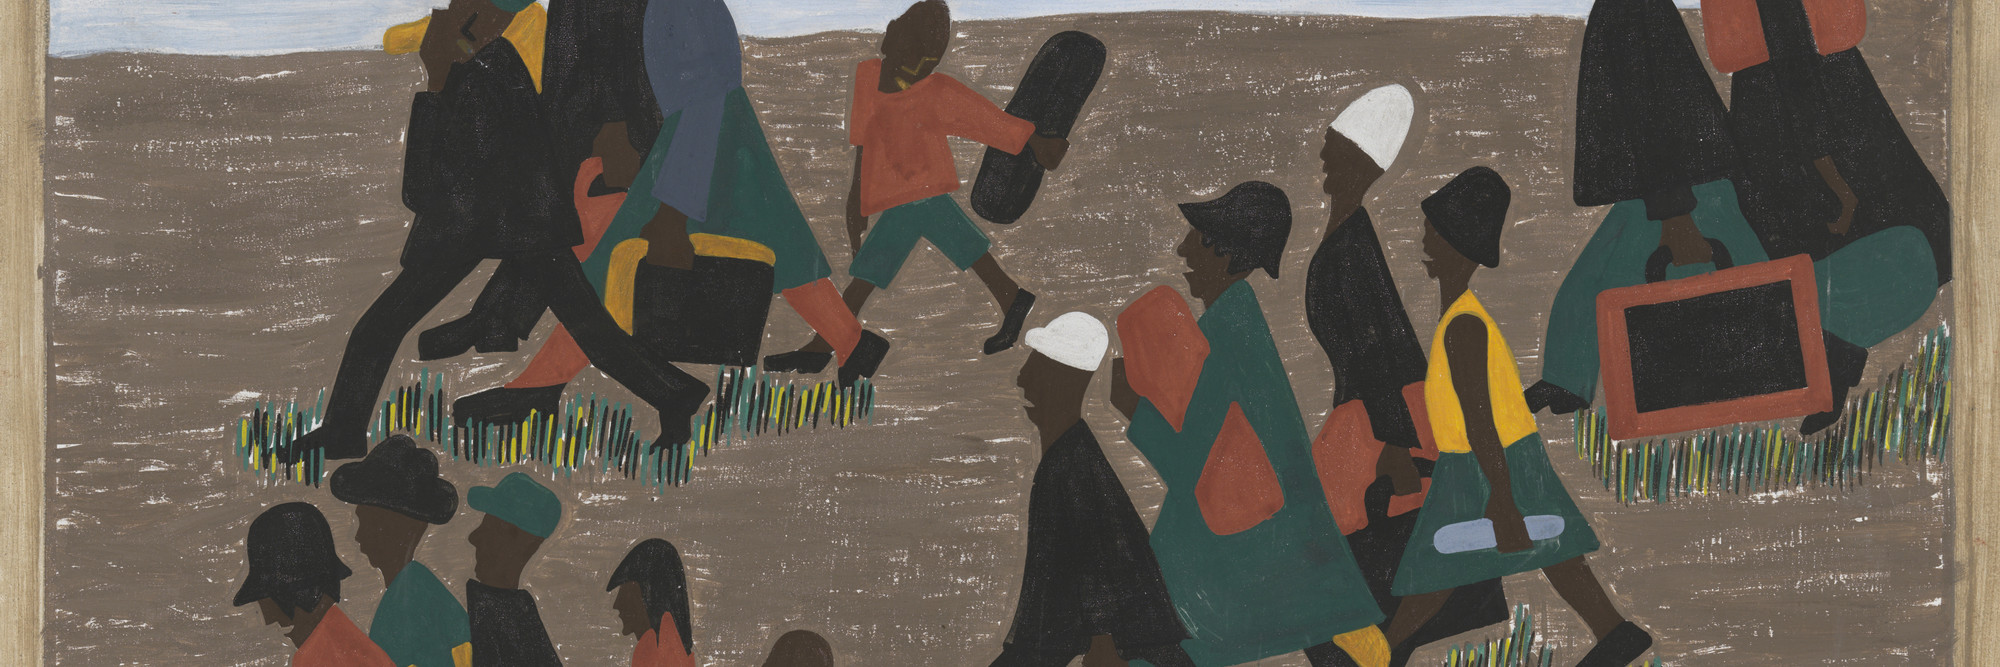 Jacob Lawrence. The migrants arrived in great numbers (panel 40 of 60). 1940–41. Casein tempera on hardboard, 12 × 18″ (30.5 × 45.7 cm). Gift of Mrs. David M. Levy. © 2016 Jacob Lawrence / Artists Rights Society (ARS), New York